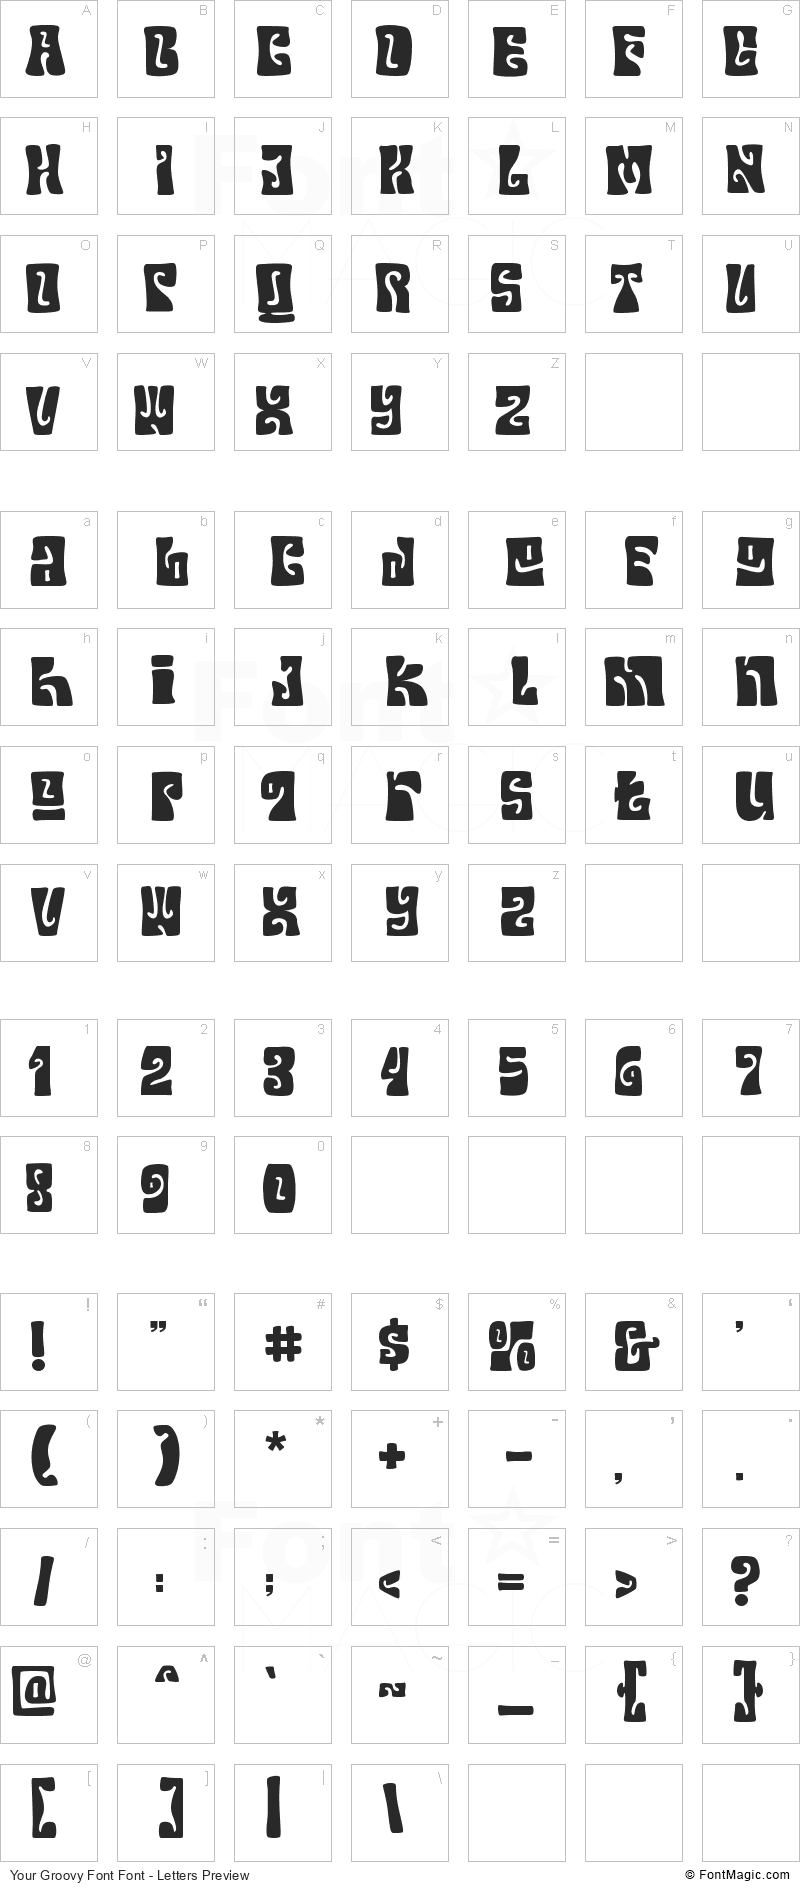 Your Groovy Font Font - All Latters Preview Chart